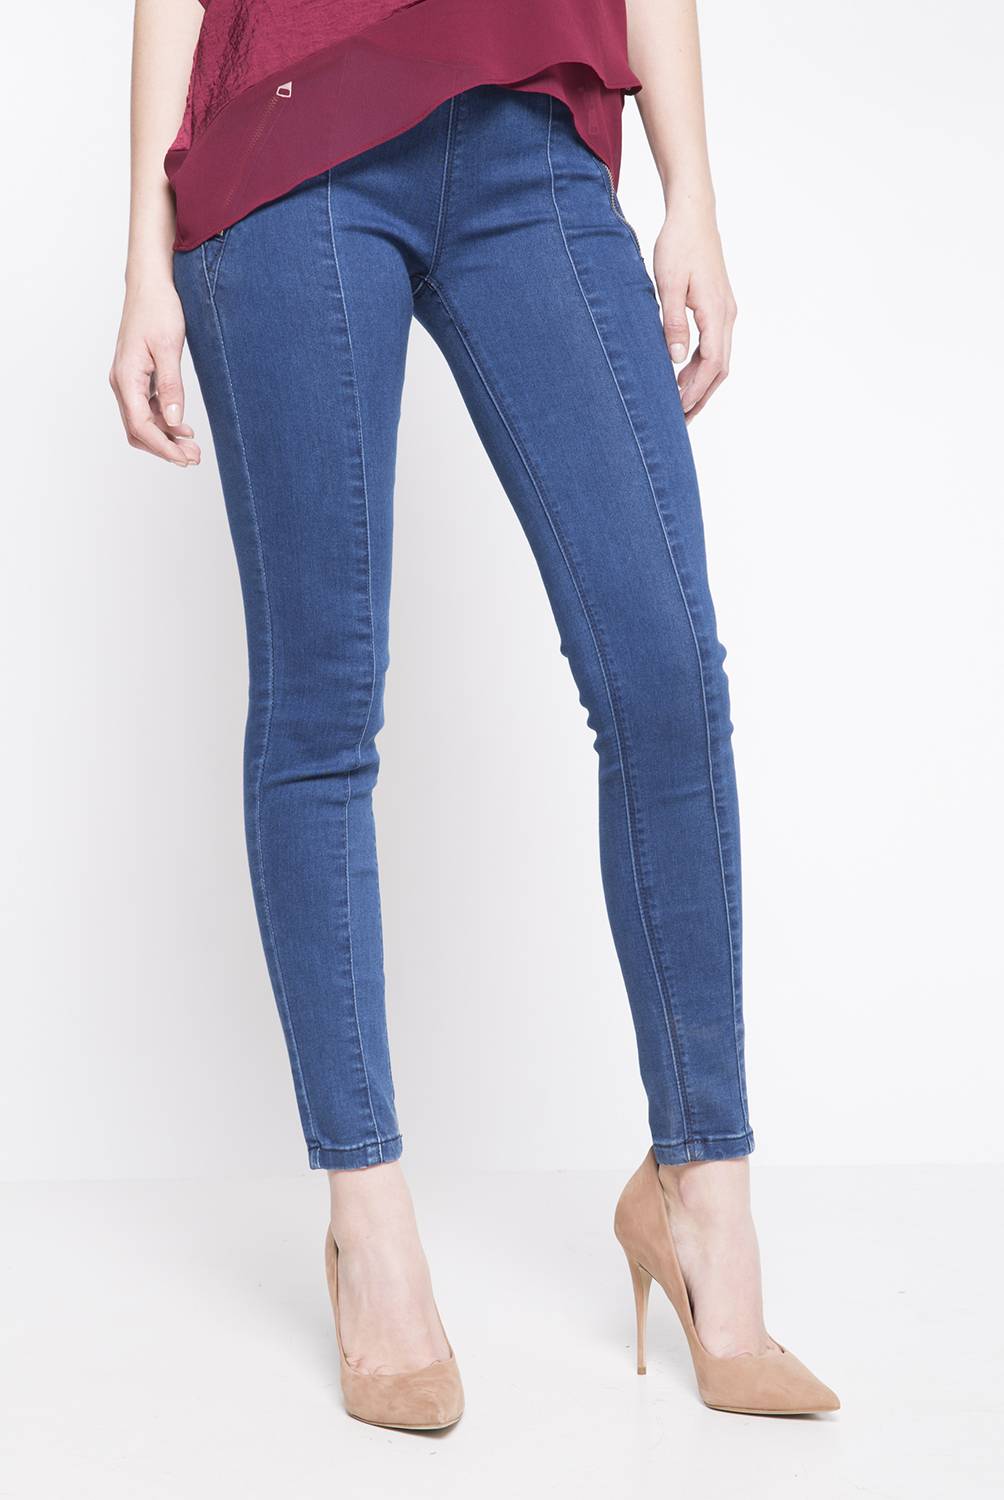 APOLOGY - Jeans Mujer